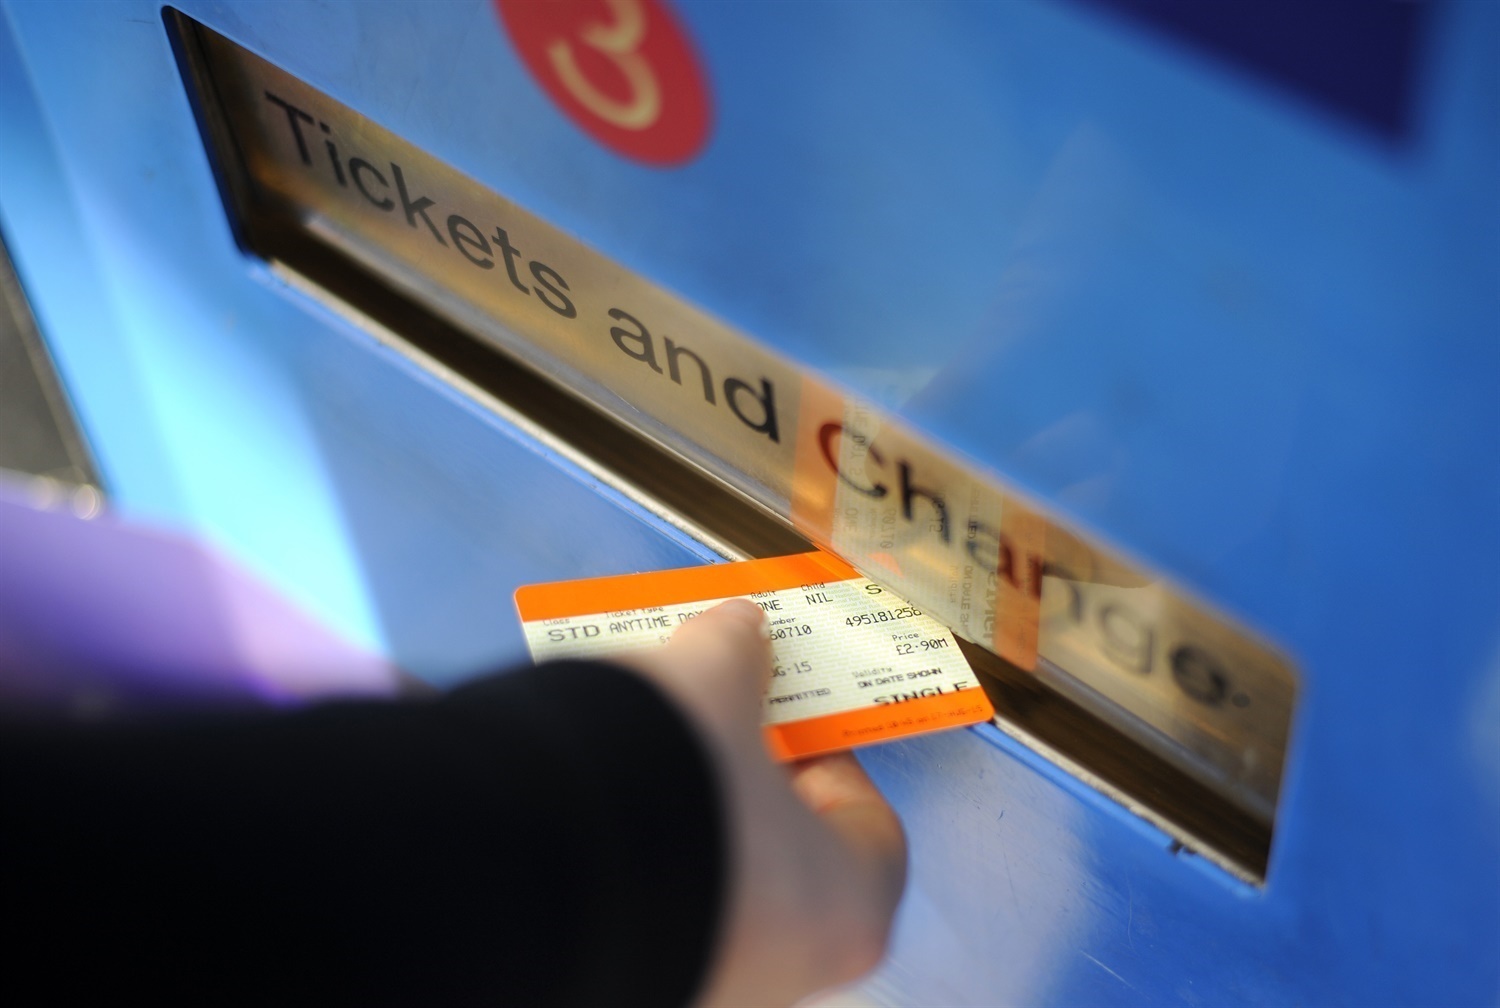 ‘Honest’ fare-dodgers allowed to appeal penalty fares under new rule